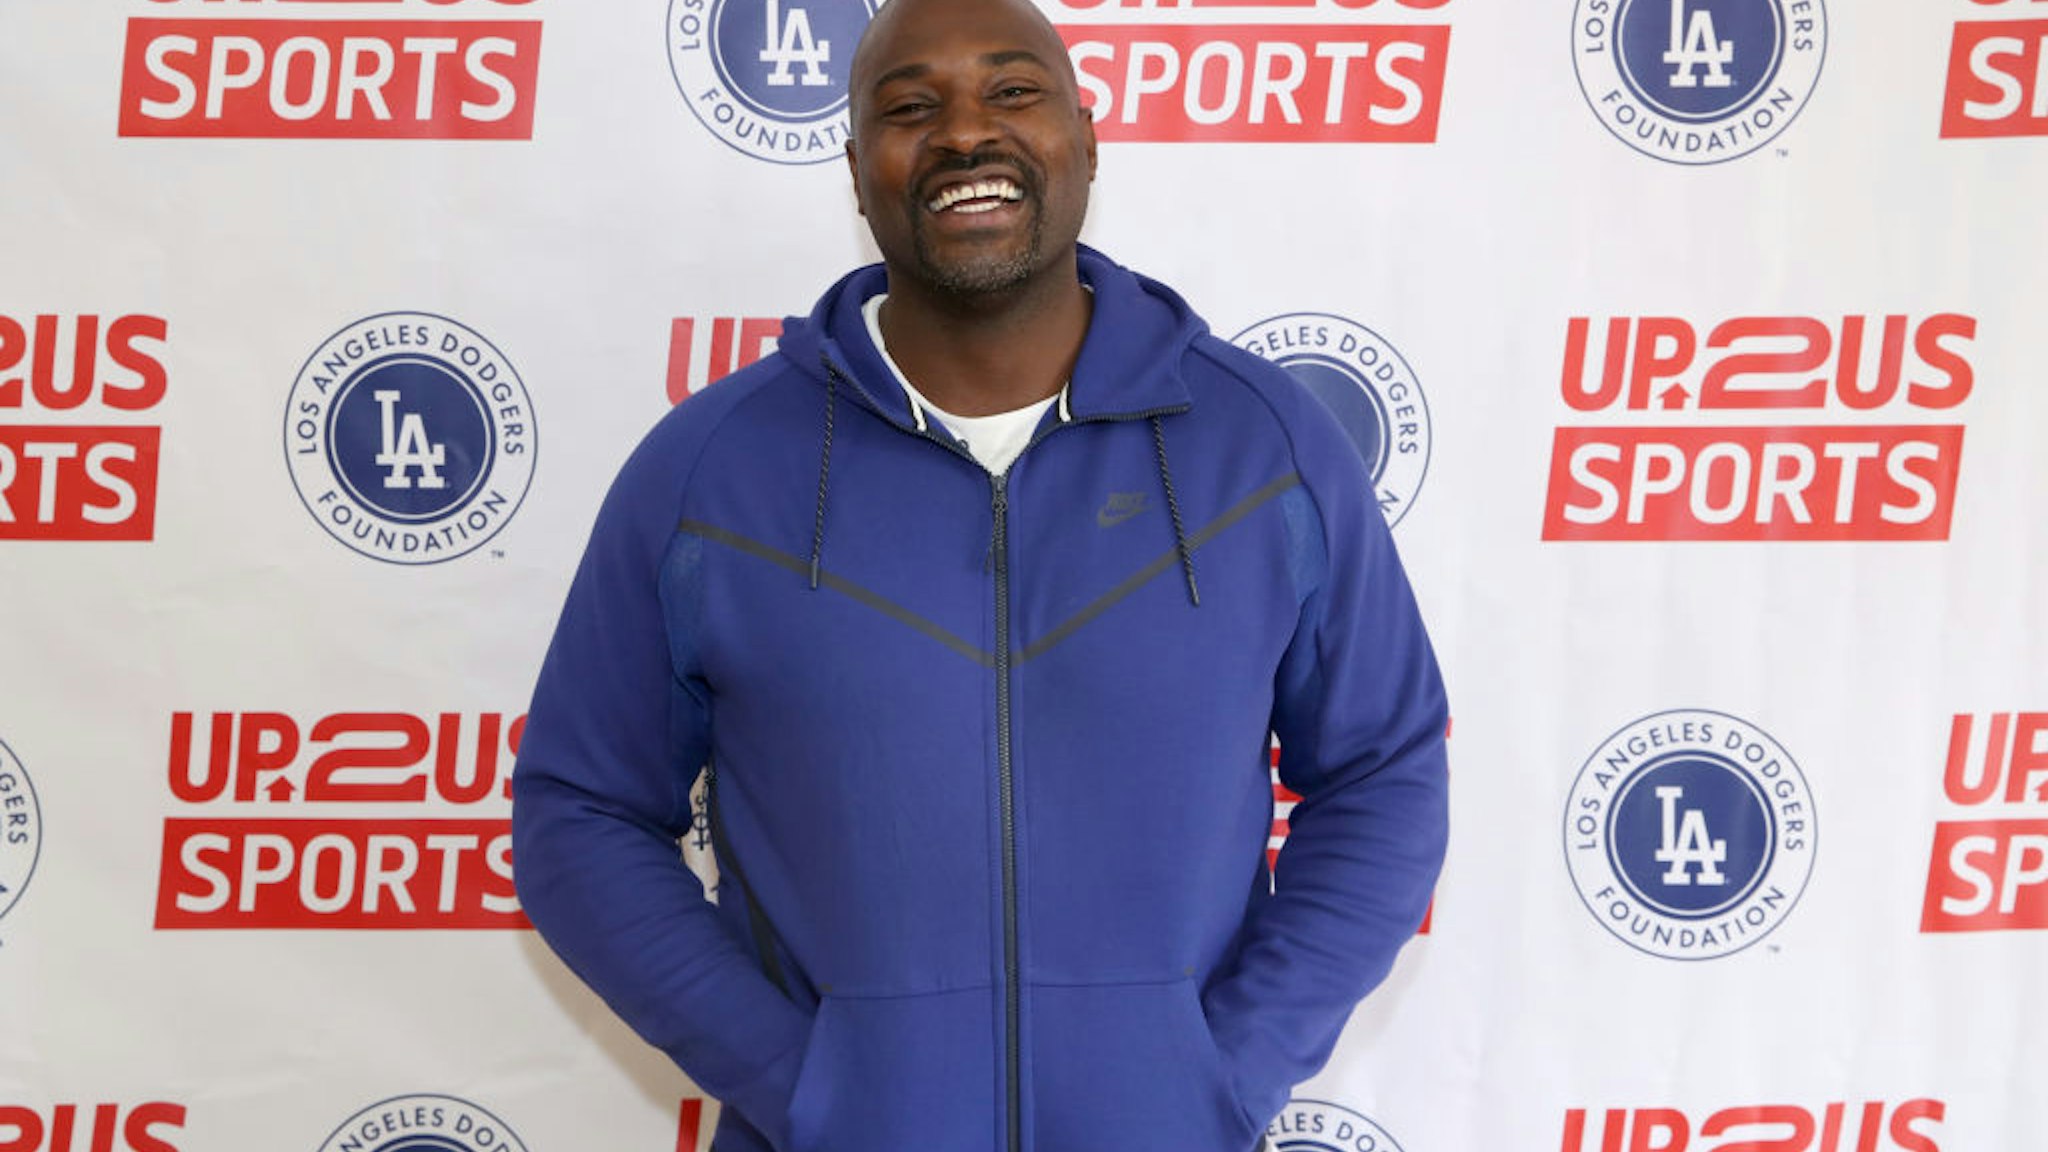 Marcellus Wiley attends Trauma-Sensitive Training for Sports Coaches in LA at Jesse Owens Recreation Center on May 23, 2019 in Los Angeles, California.